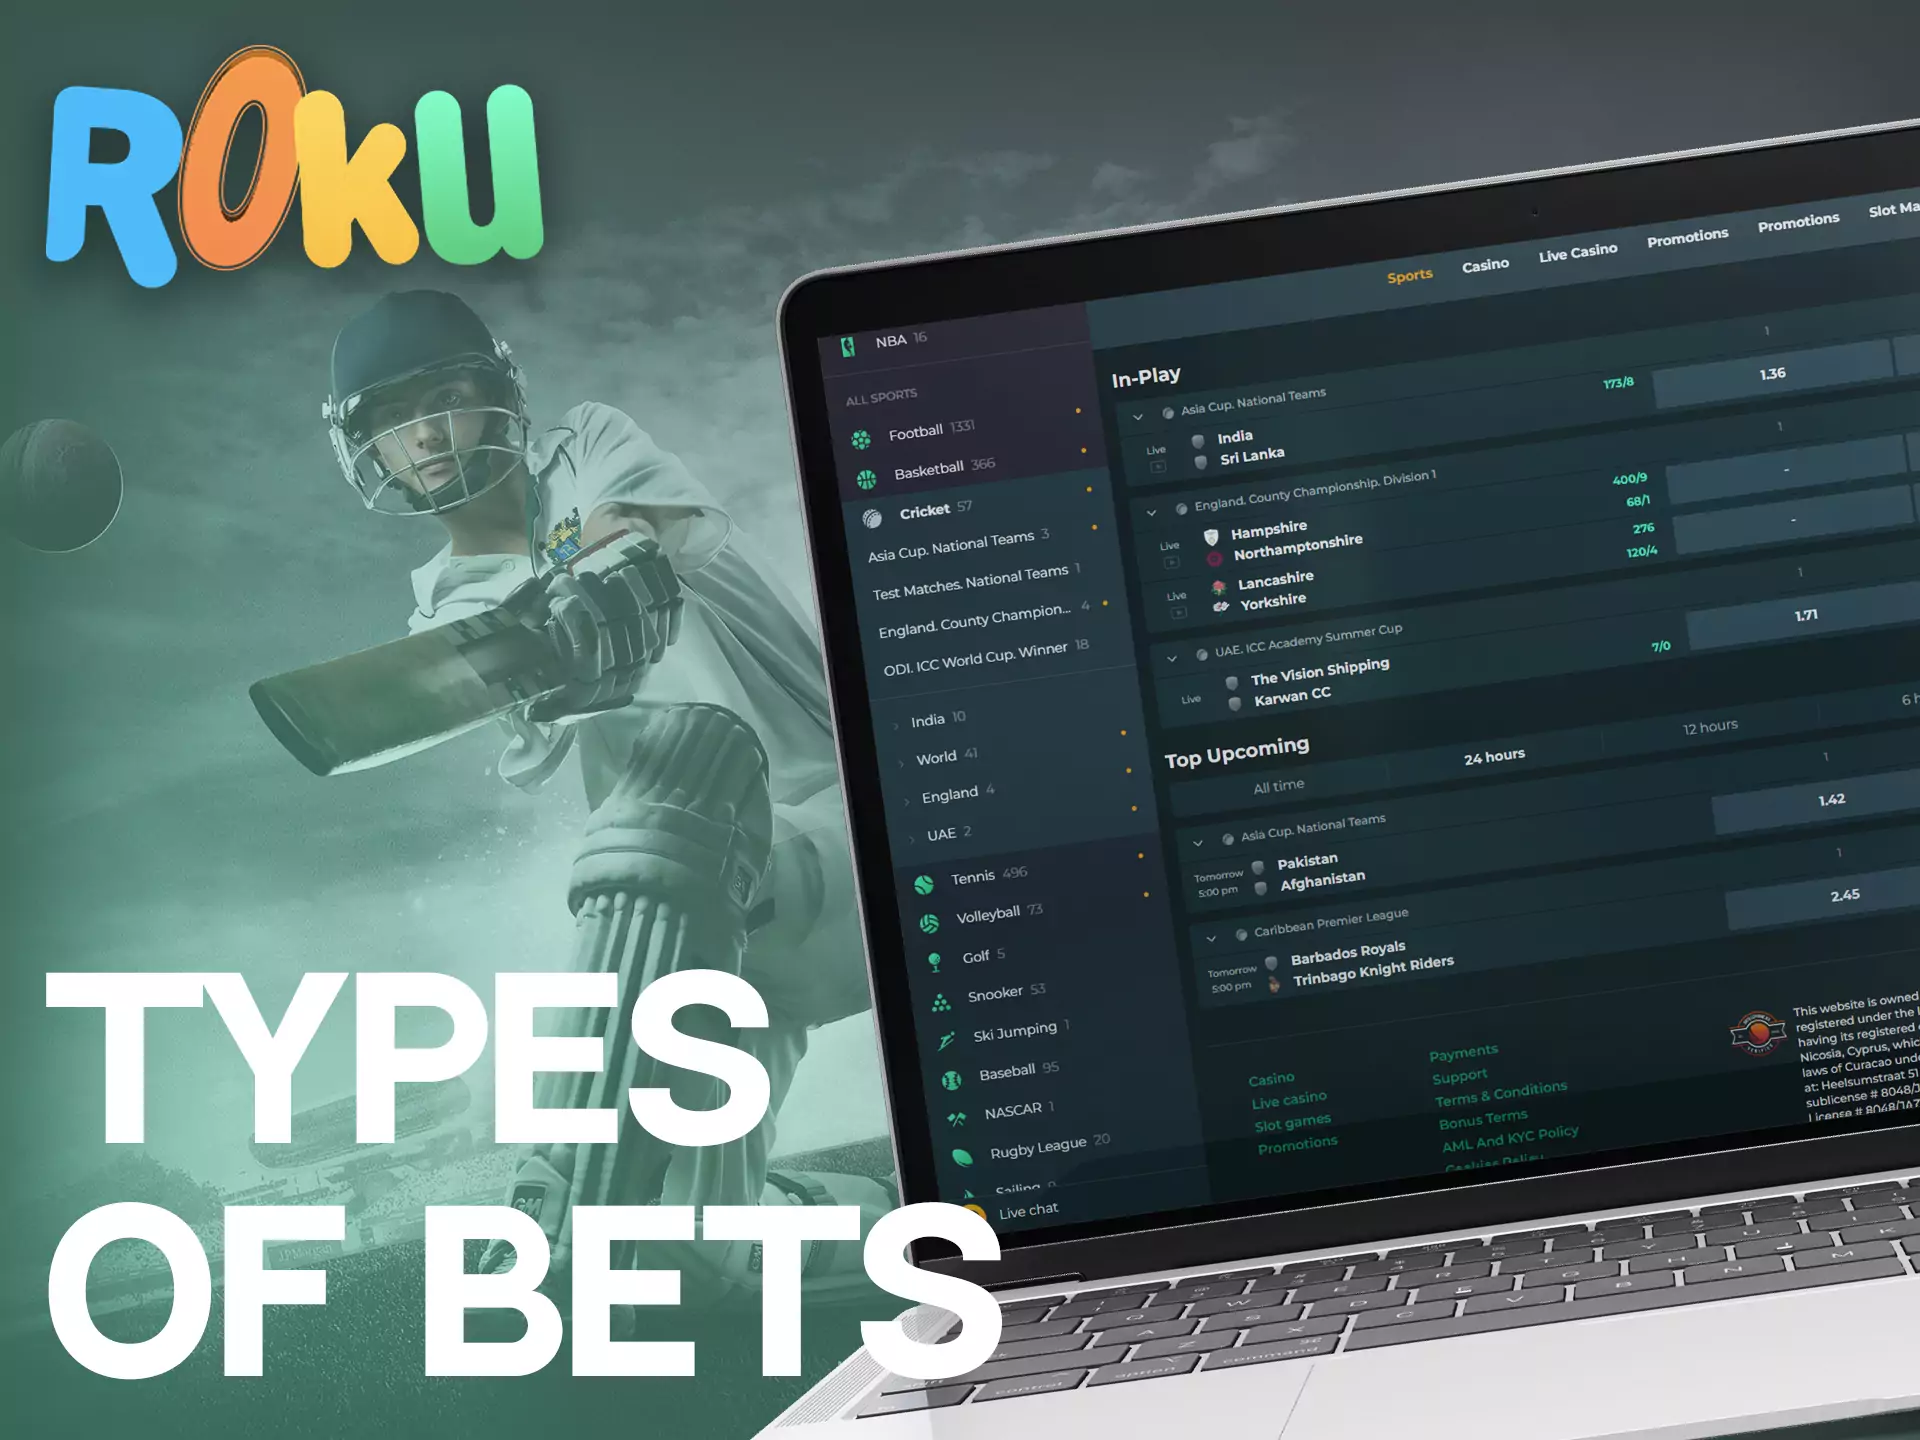 If you can't choose only one type of bet, you can try any of them.